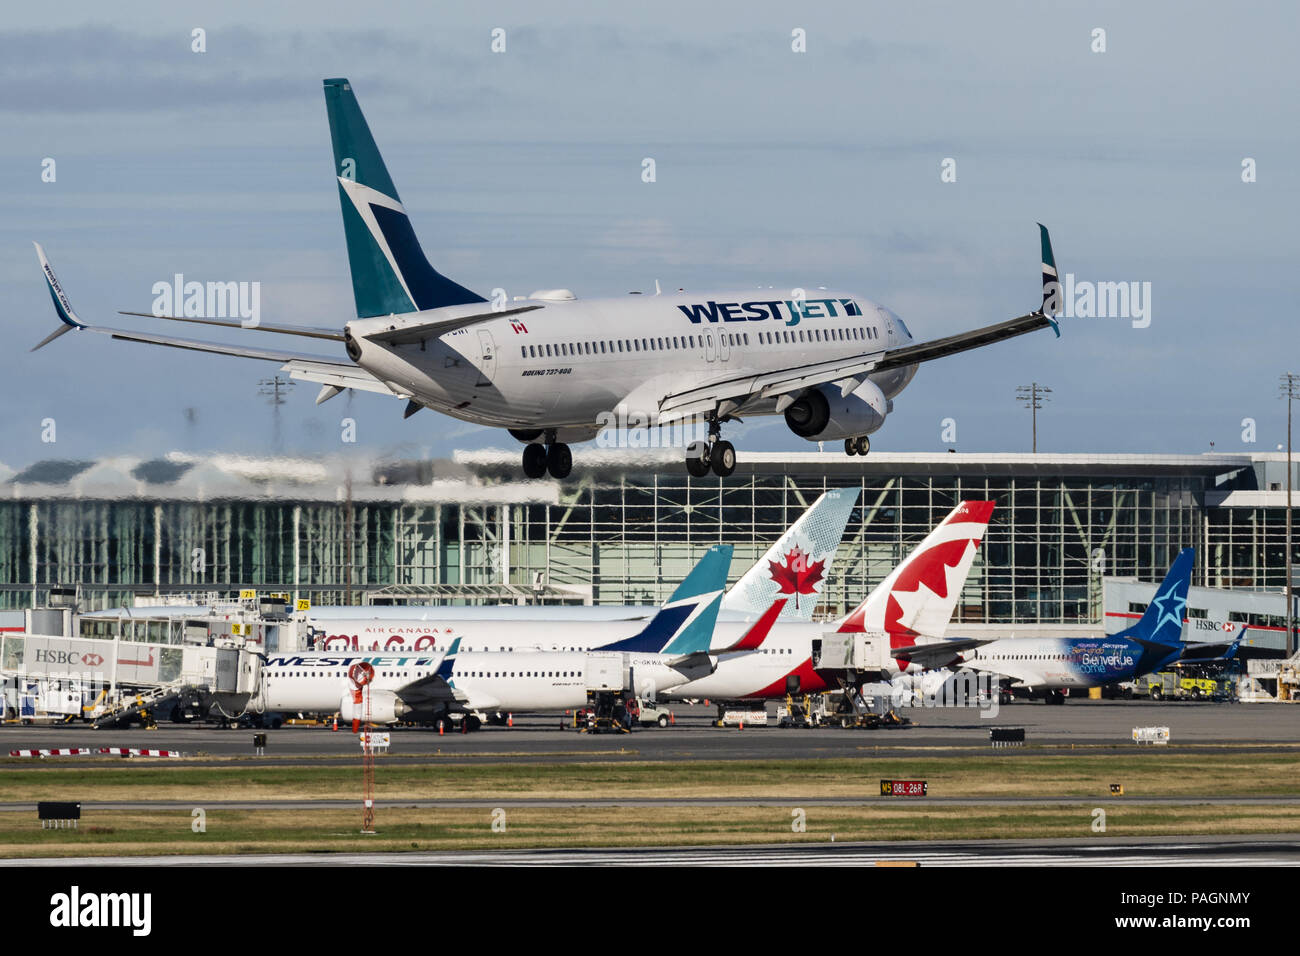 Richmond, British Columbia, Canada. 8th July, 2018. A WestJet Airlines Boeing 737-800 (C-FBWI) single-aisle narrow-body jet airliner lands at Vancouver International Airport. In the background airliners from Canadian air carriers WestJet Airlines, Air Canada Rouge, Air Canada and Air Transat are docked at the airport's U.S and International terminal. Credit: Bayne Stanley/ZUMA Wire/Alamy Live News Stock Photo